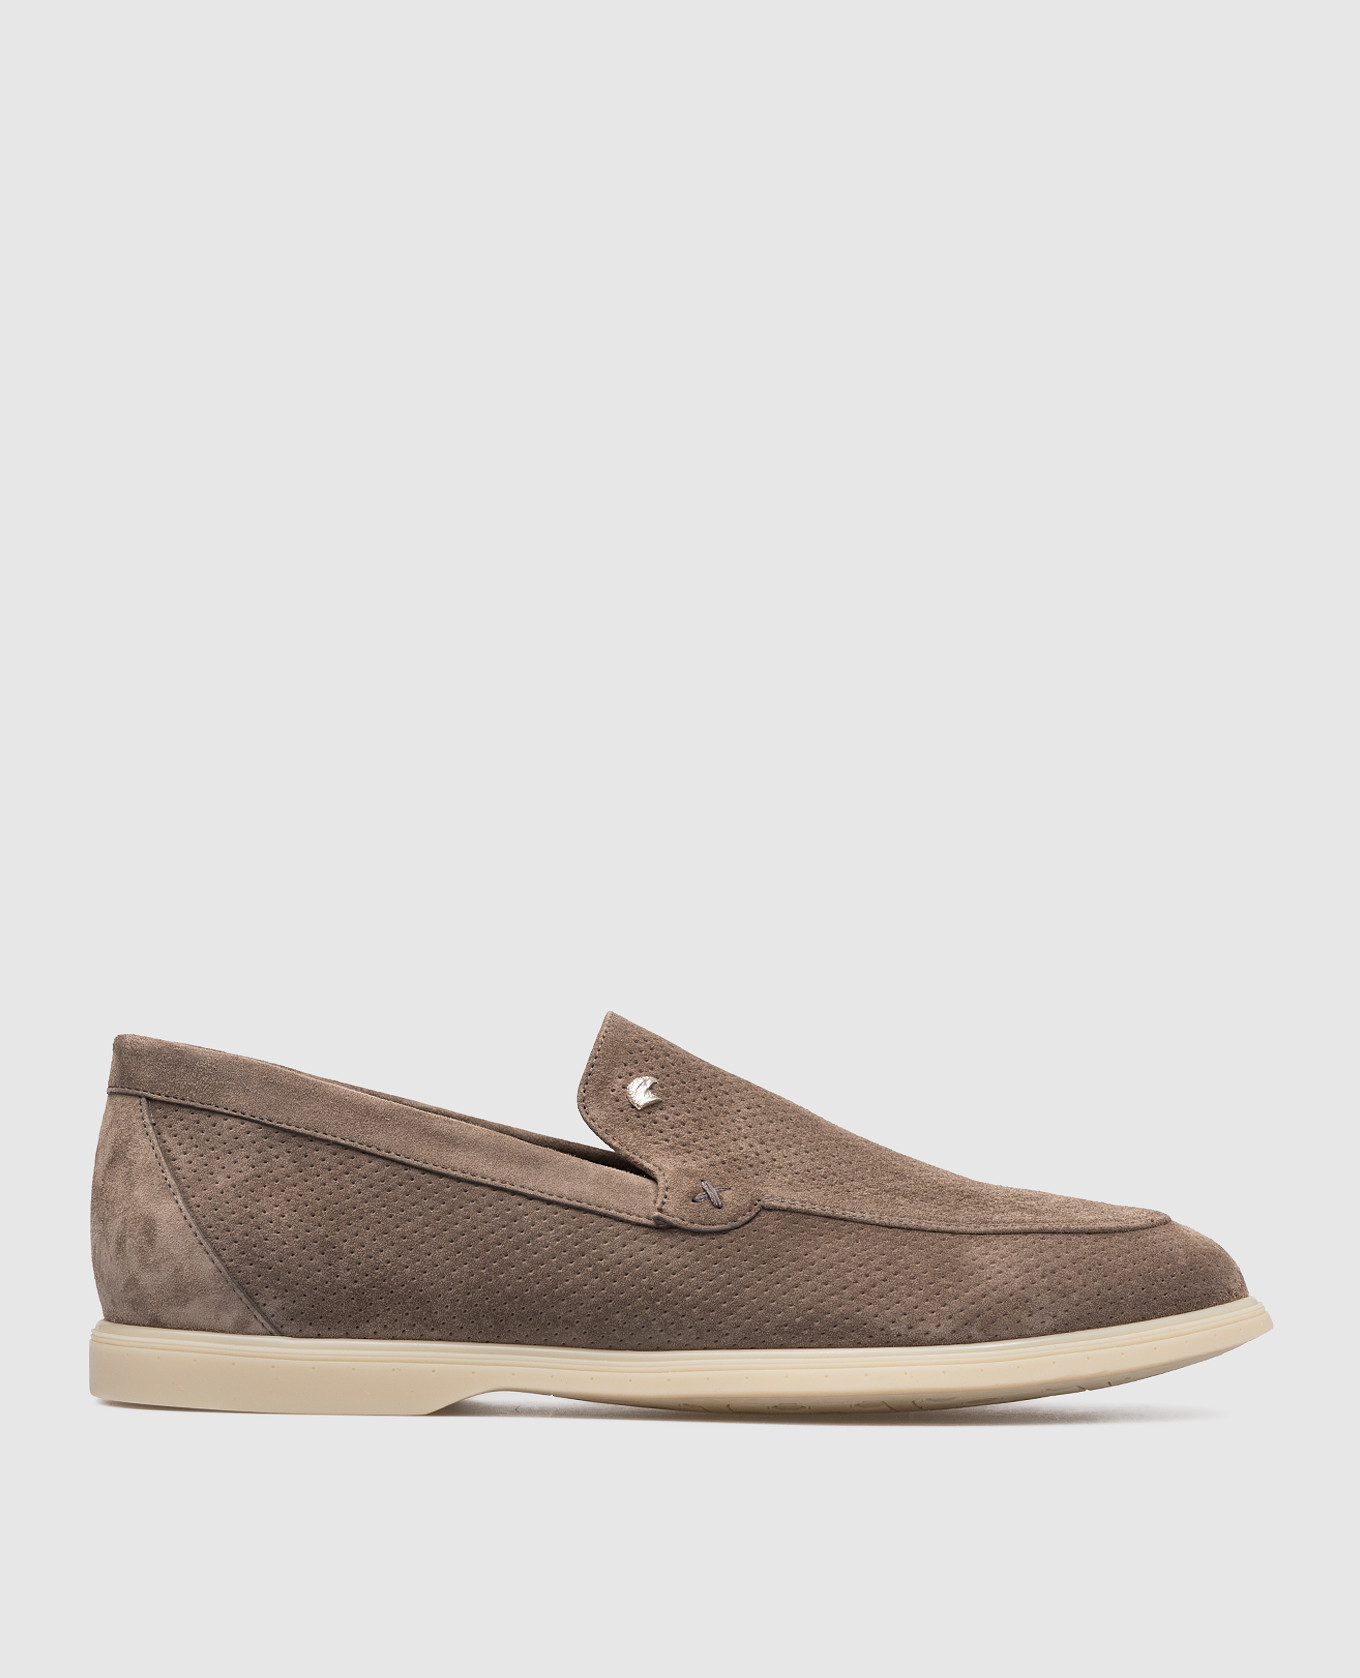 Brown suede slippers with perforations